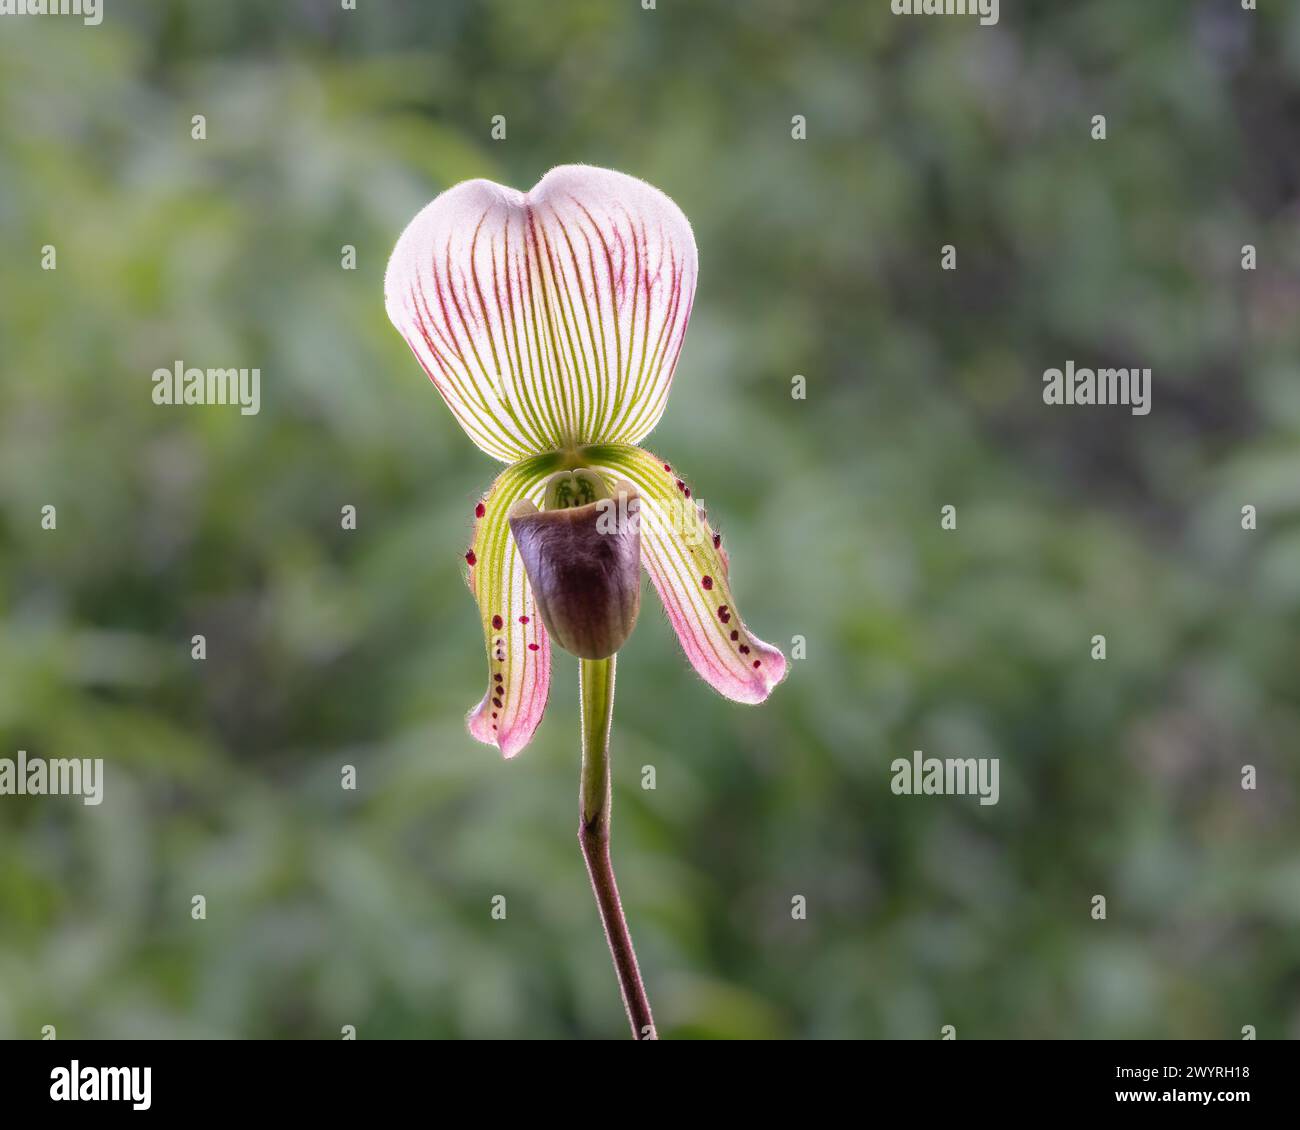 Closeup view of backlit purple green and white flower of blooming lady slipper orchid species paphiopedilum callosum isolated on natural background Stock Photo